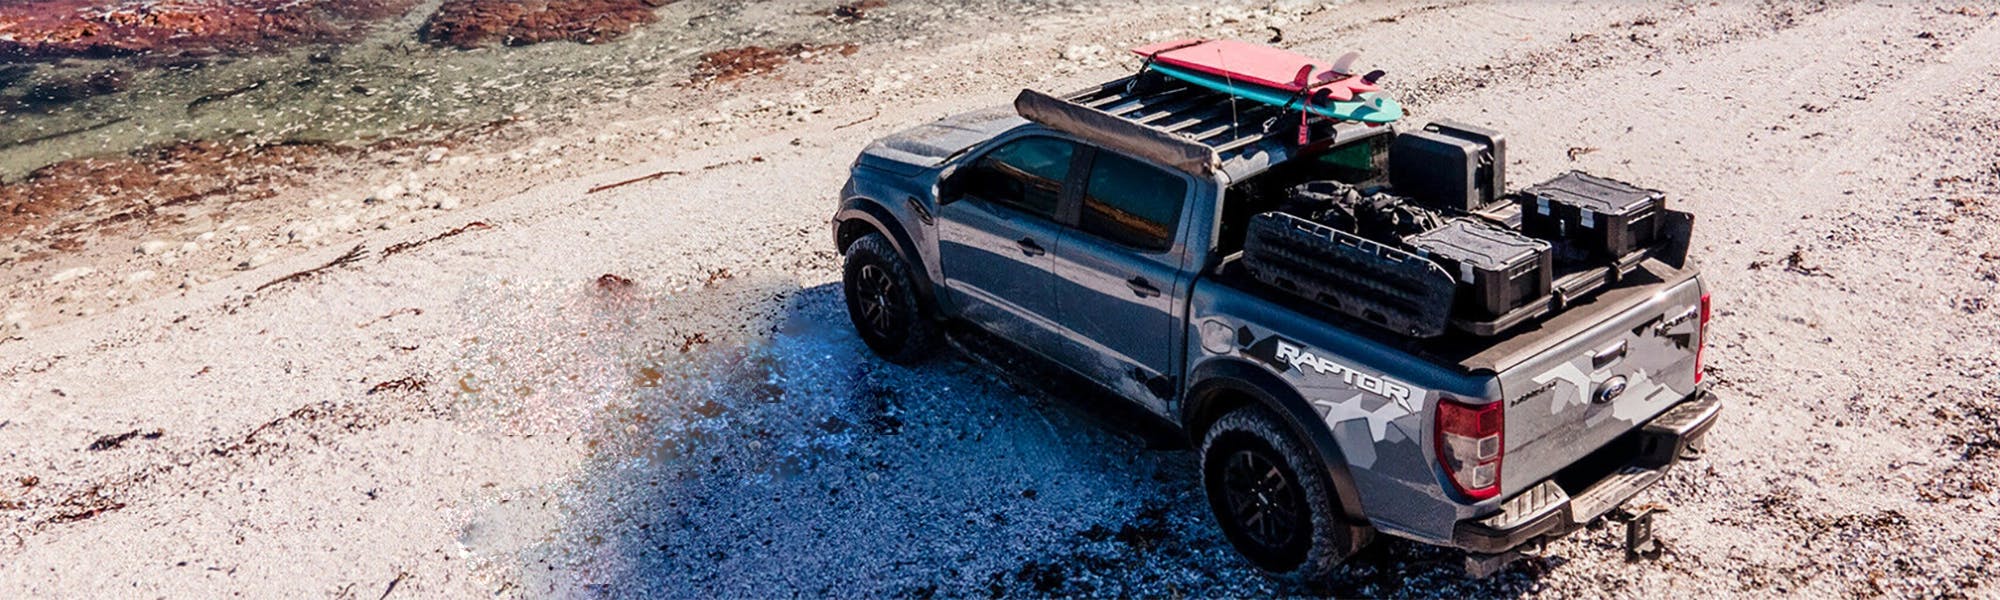 Rhino-Rack Truck Bed Cargo Carriers